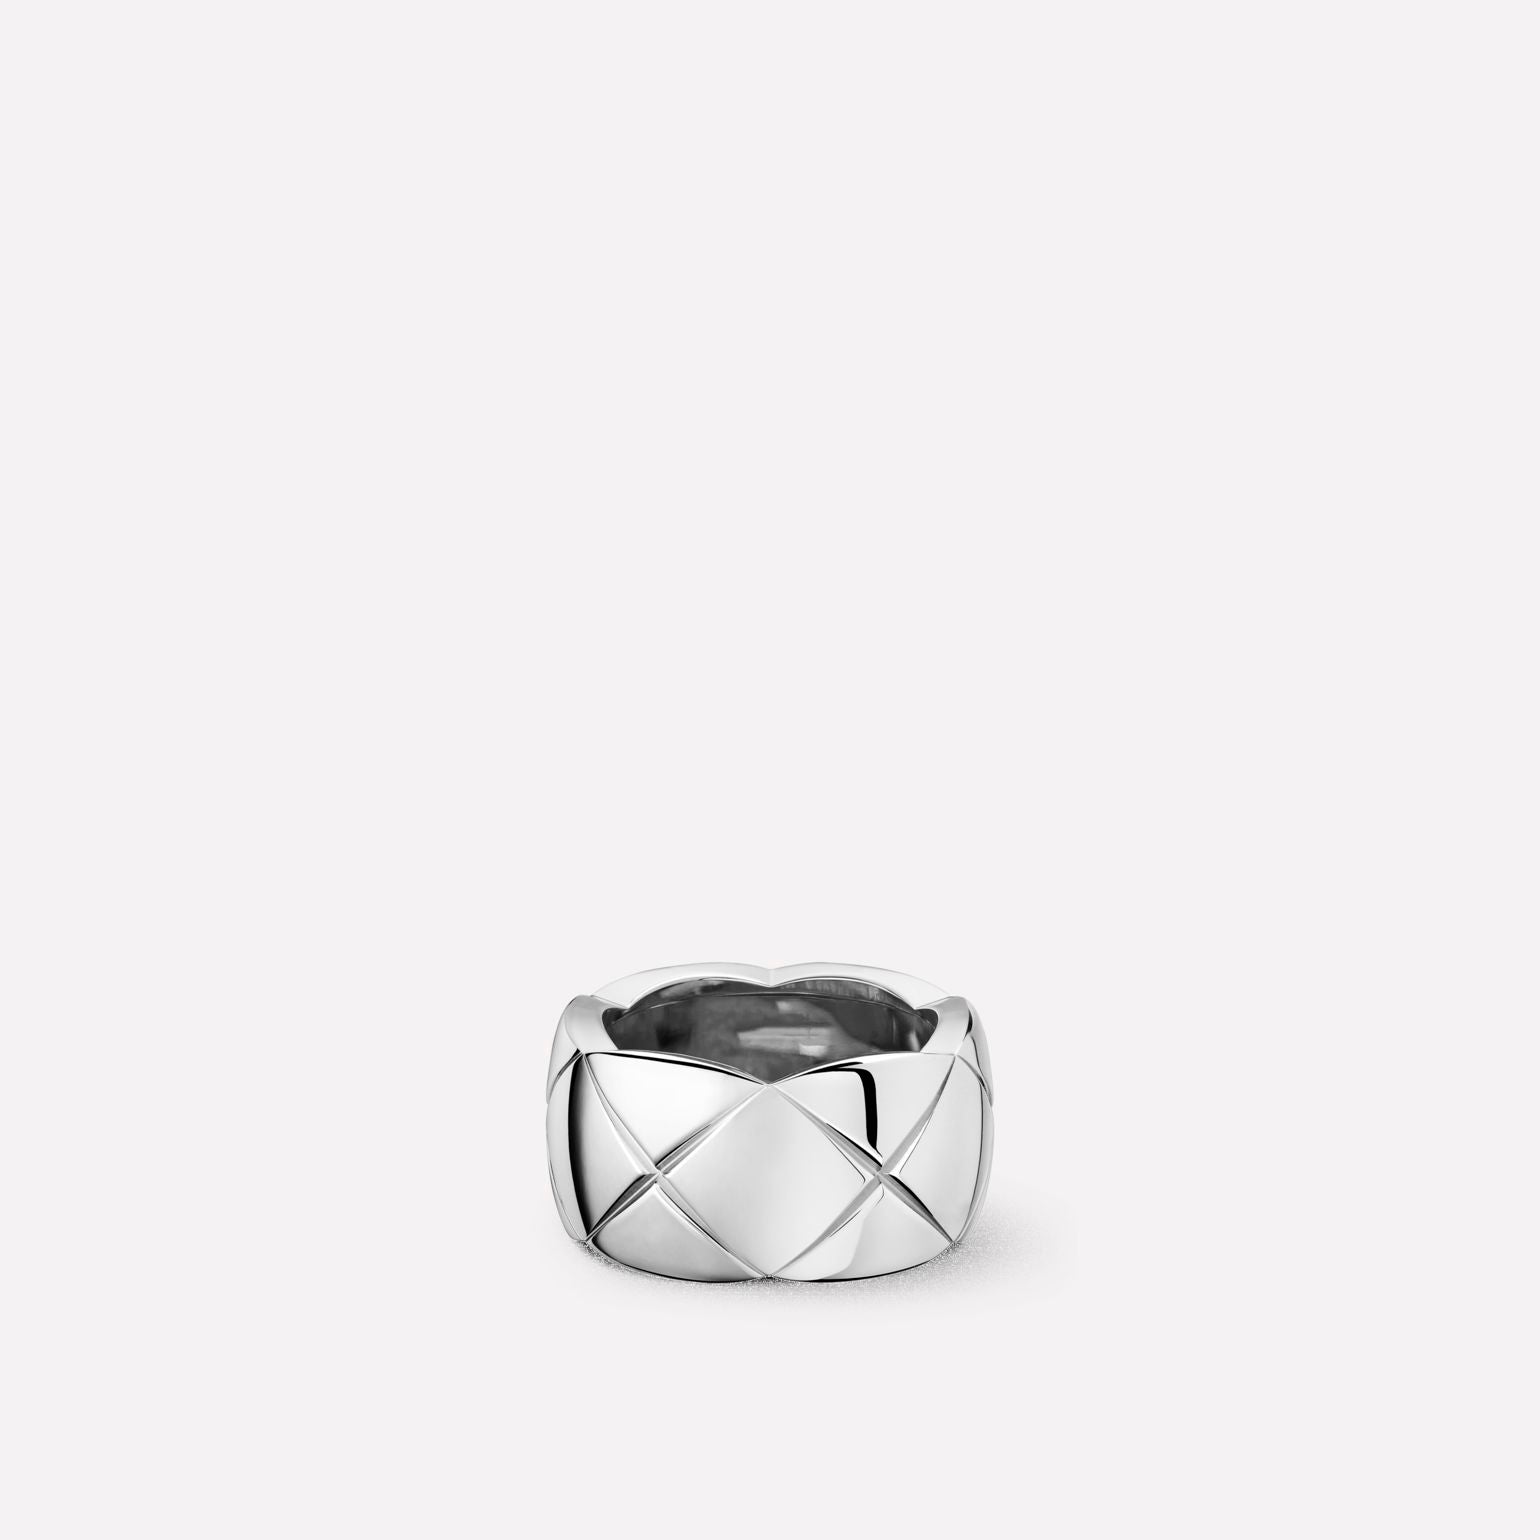 Coco Quilted Motif Ring, Large Version, White Gold